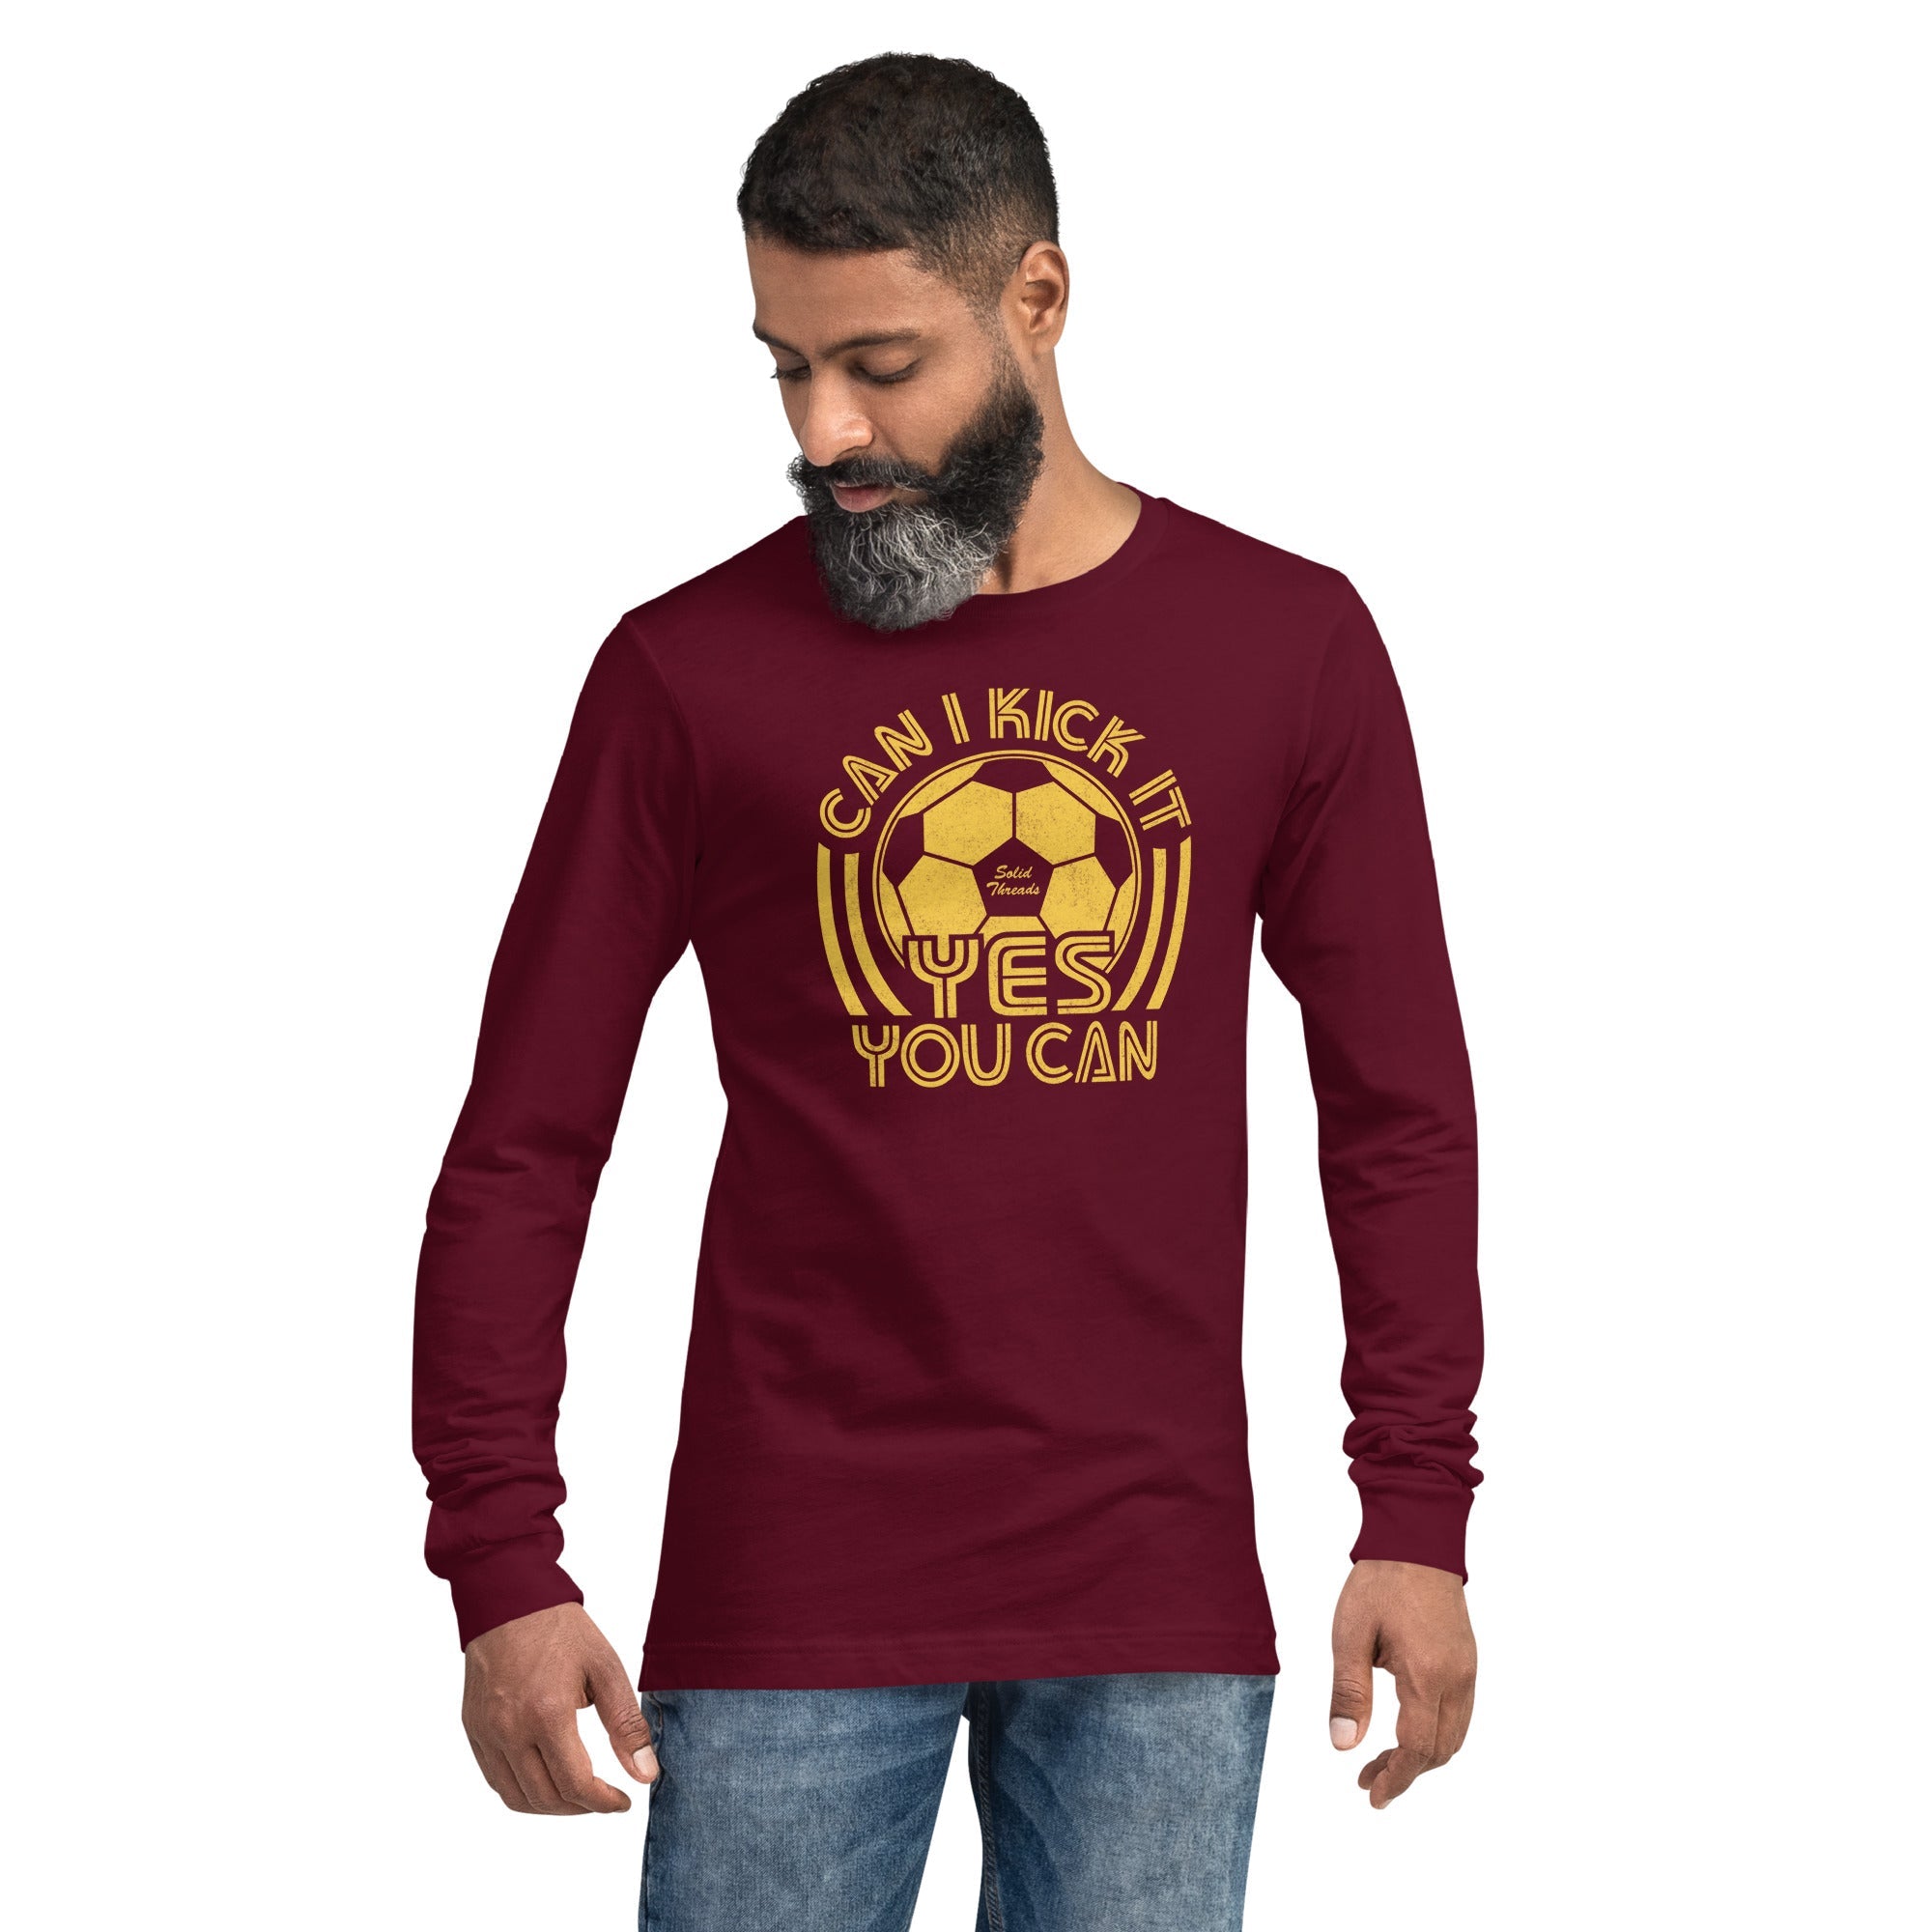 Unisex Can I Kick It, Yes You Can Long Sleeve Funny Graphic Tee | Vintage Soccer Maroon T shirt on Model | Solid Threads